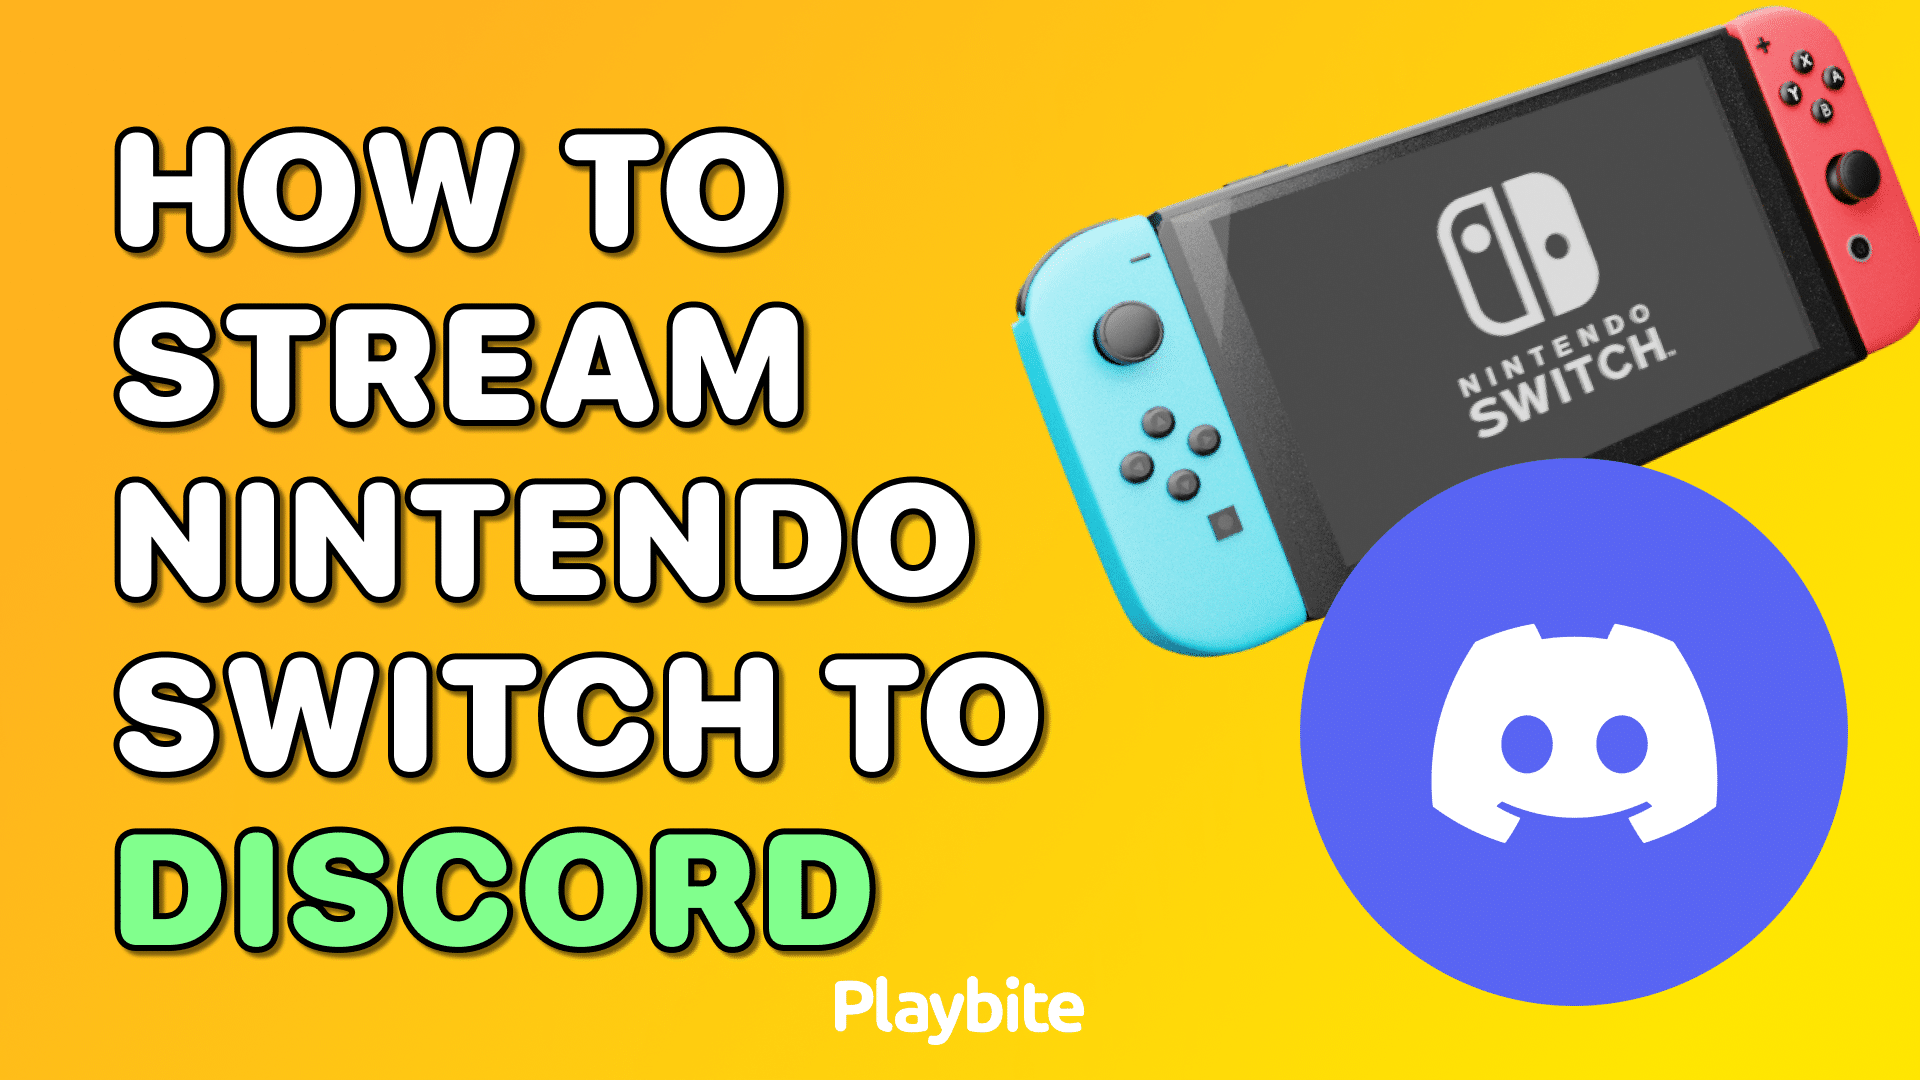 How To Stream Nintendo Switch To Discord